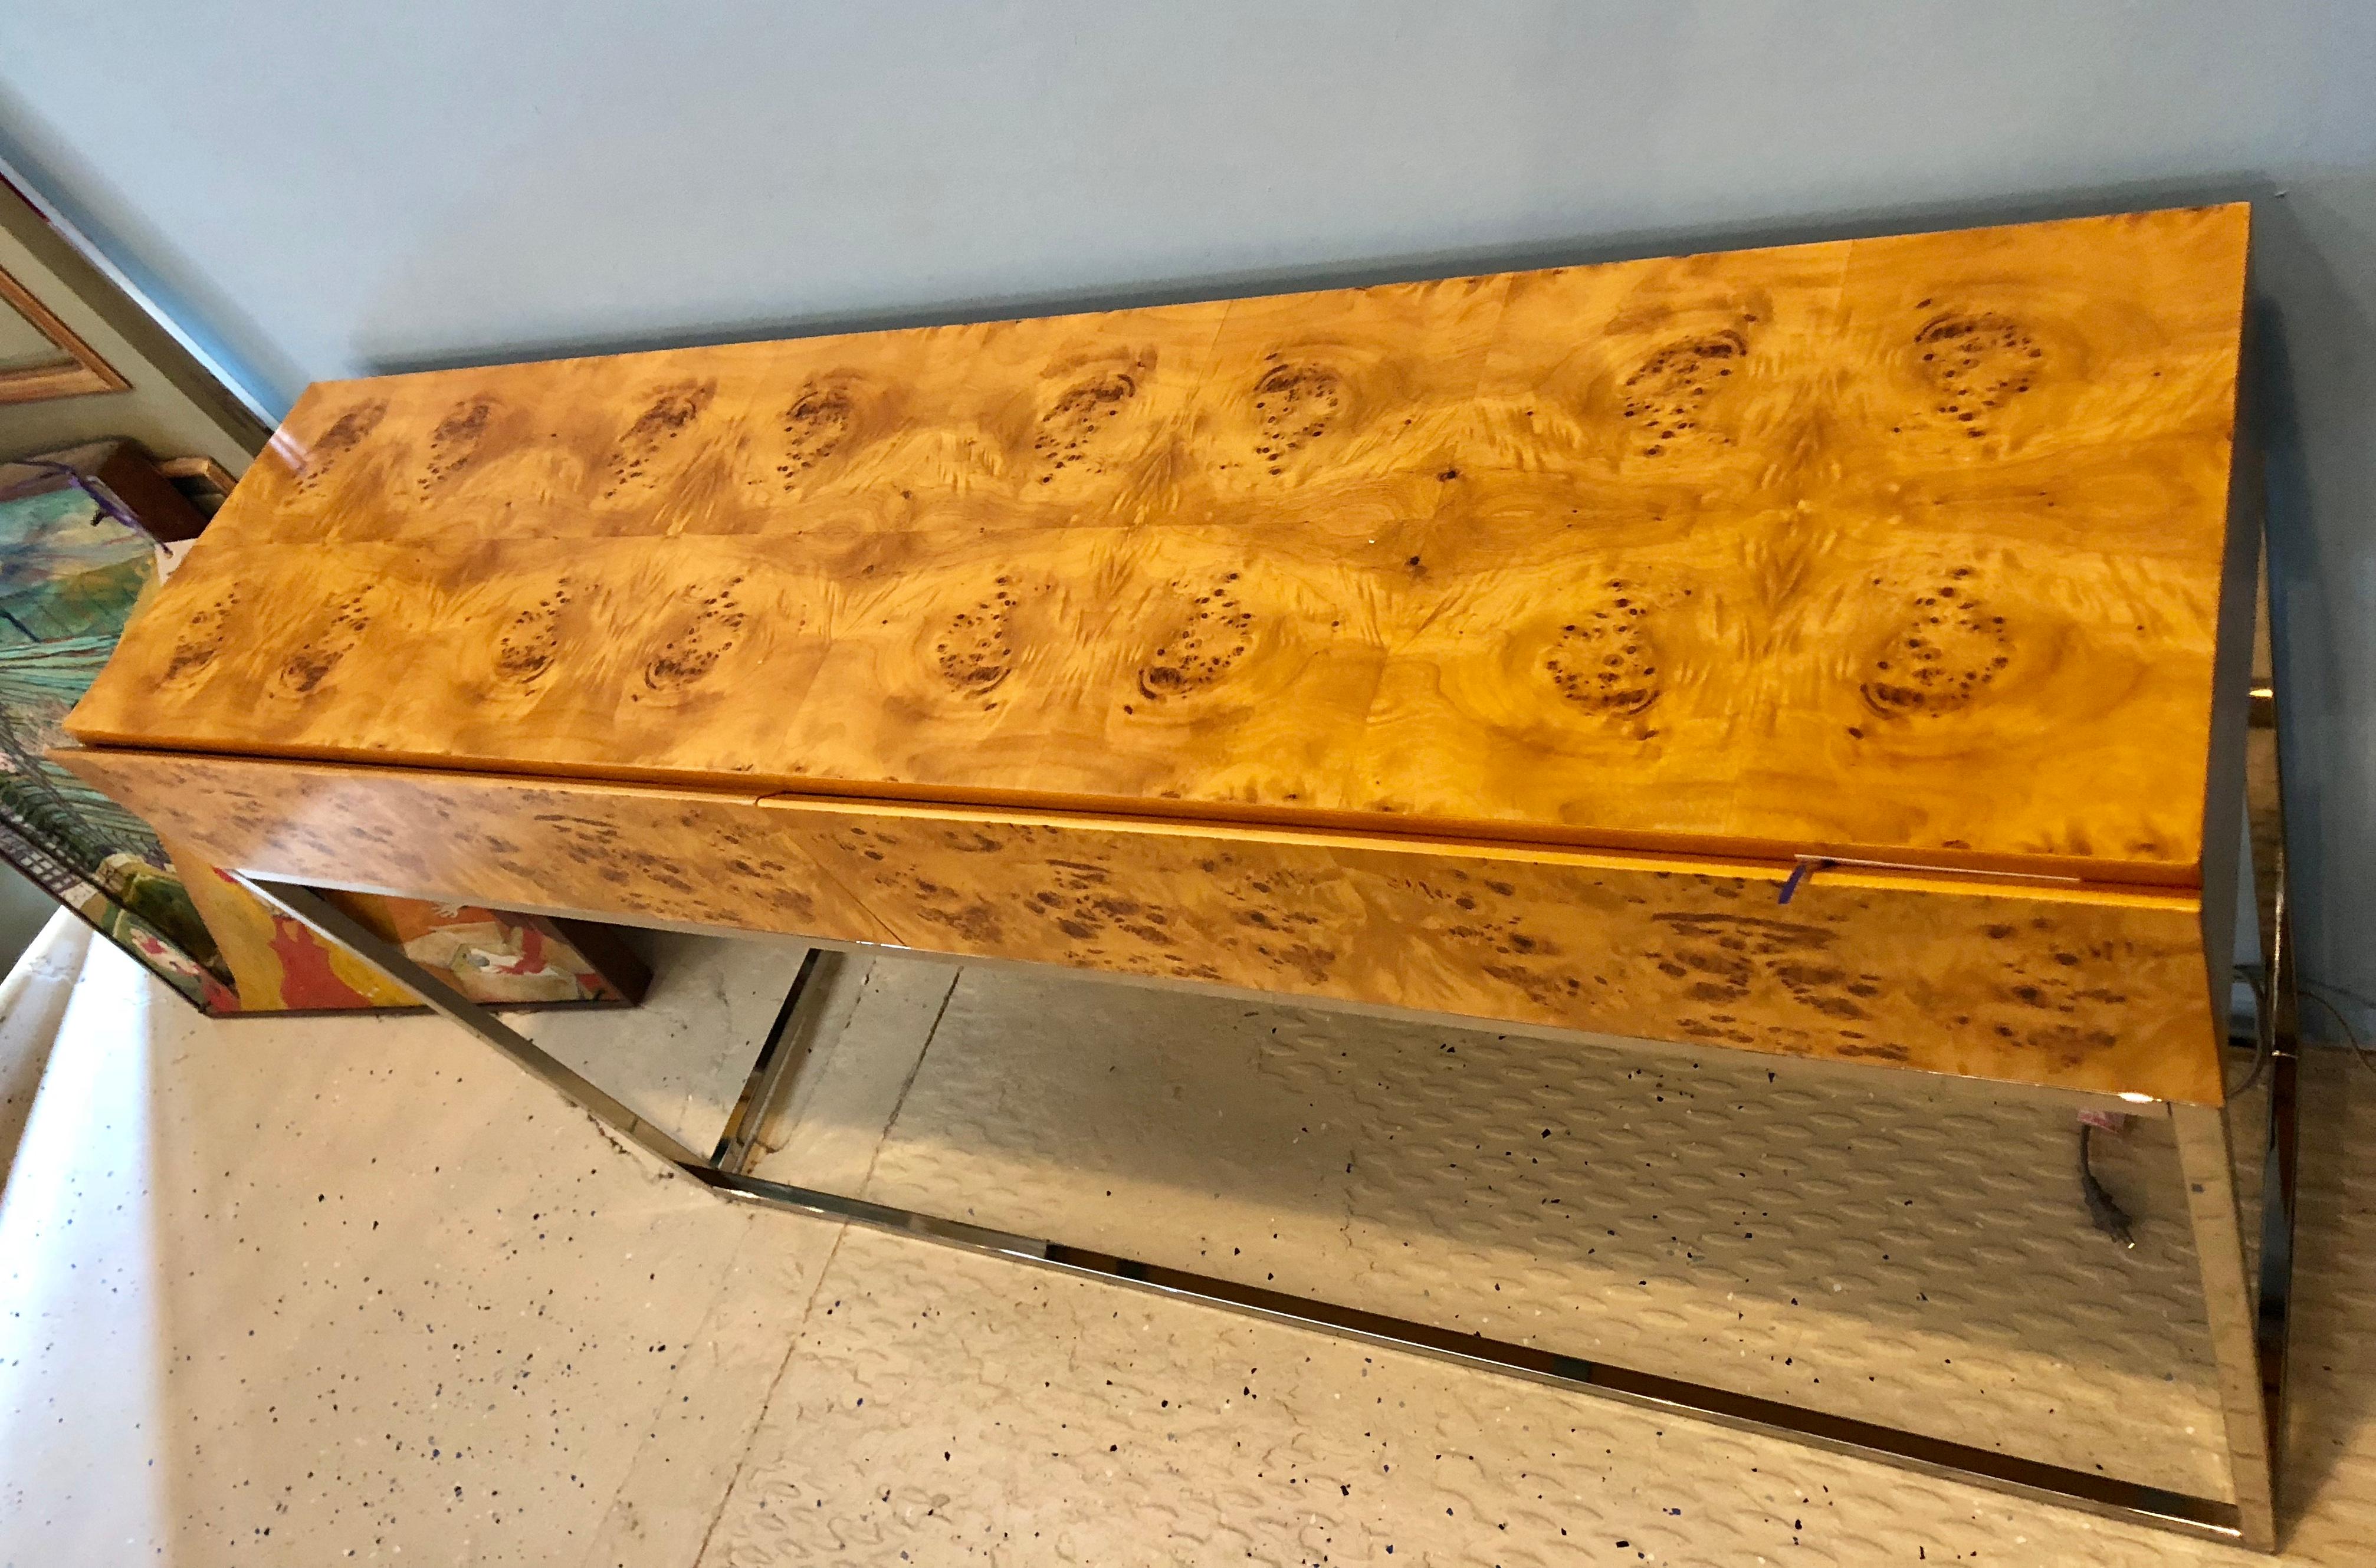 Mid-Century Modern Console Table with Nice Burl Grain Two Drawers on a Chrome Base